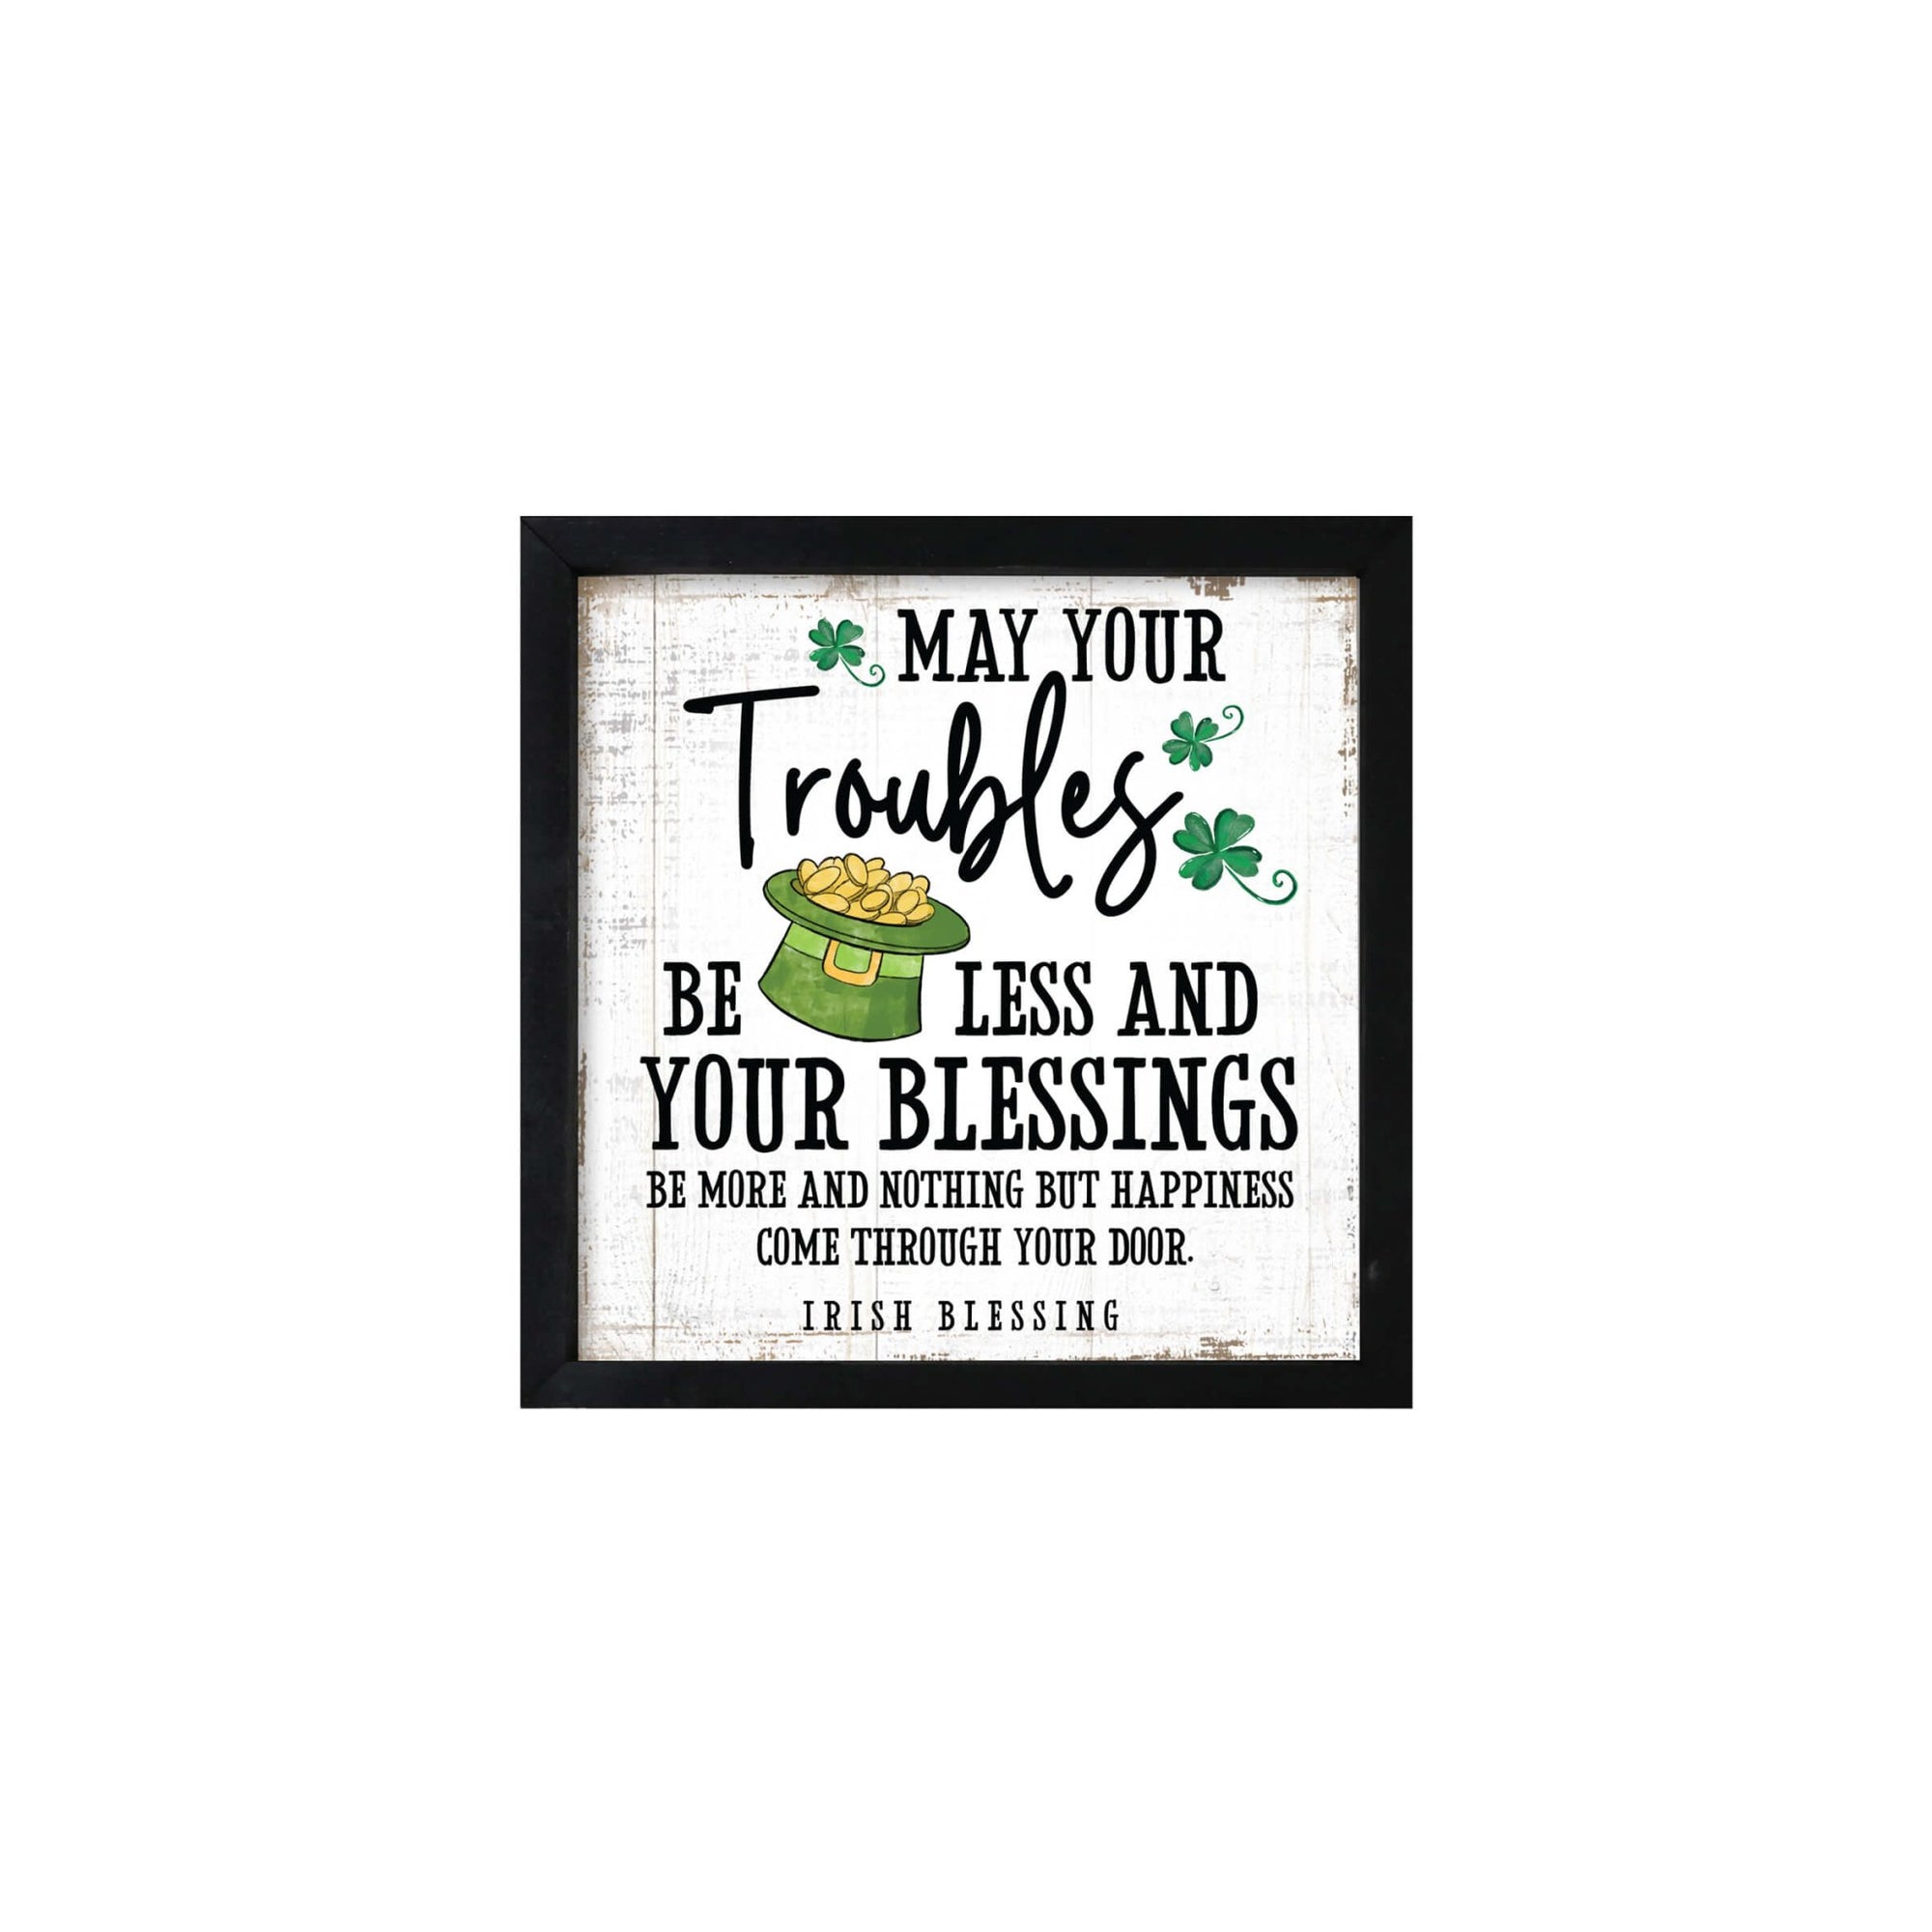 St. Patrick's Day Wooden Framed Shadow Box | Irish Blessing Modern Family Home Décorations - LifeSong Milestones